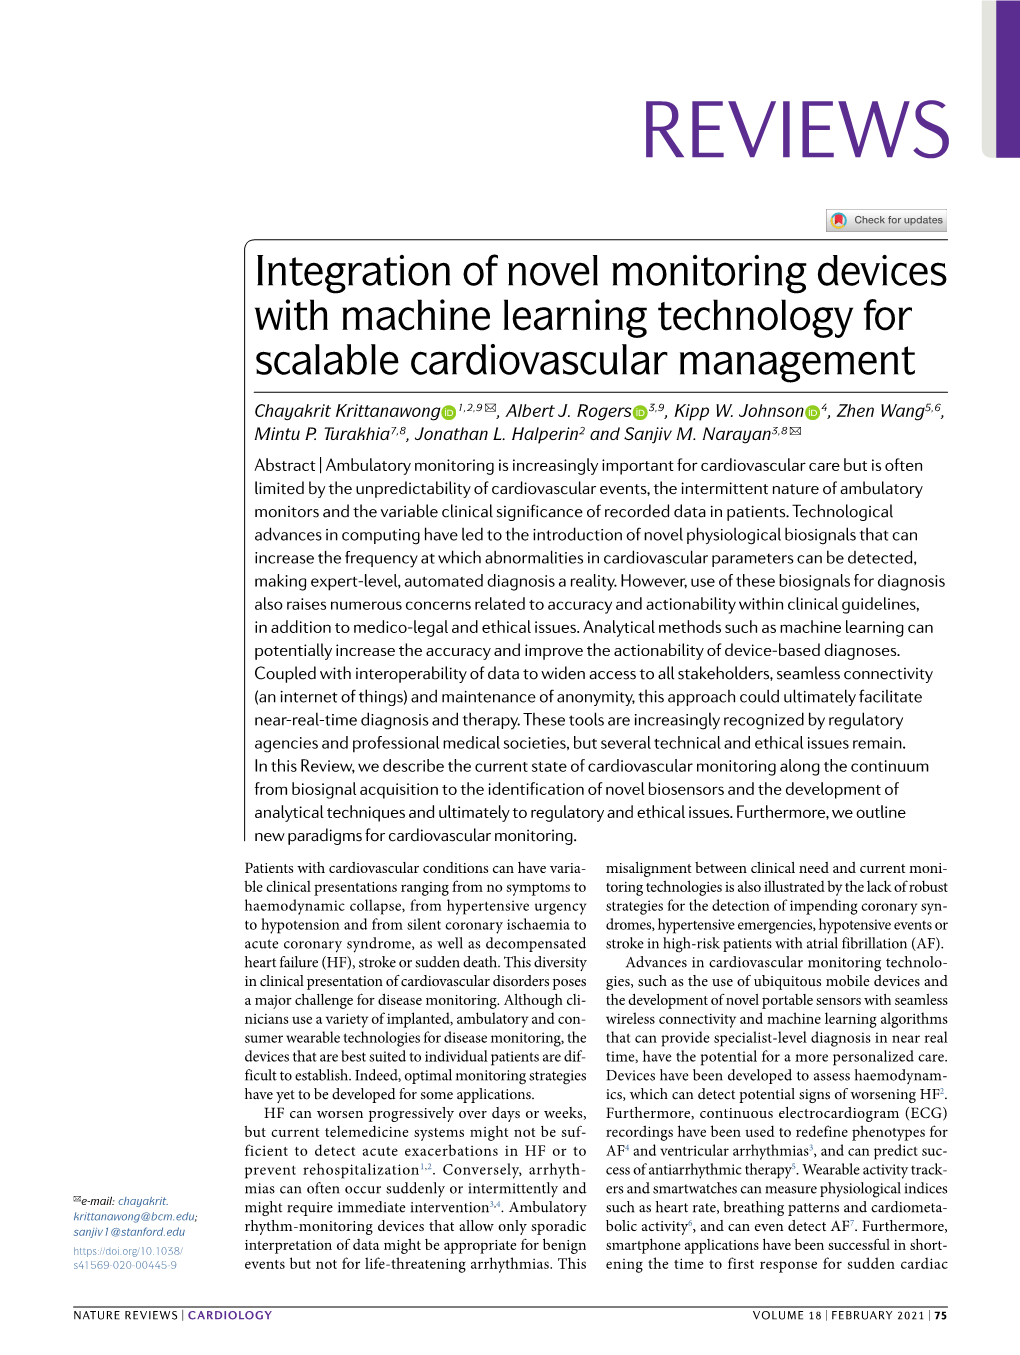 Integration of Novel Monitoring Devices with Machine Learning Technology for Scalable Cardiovascular Management